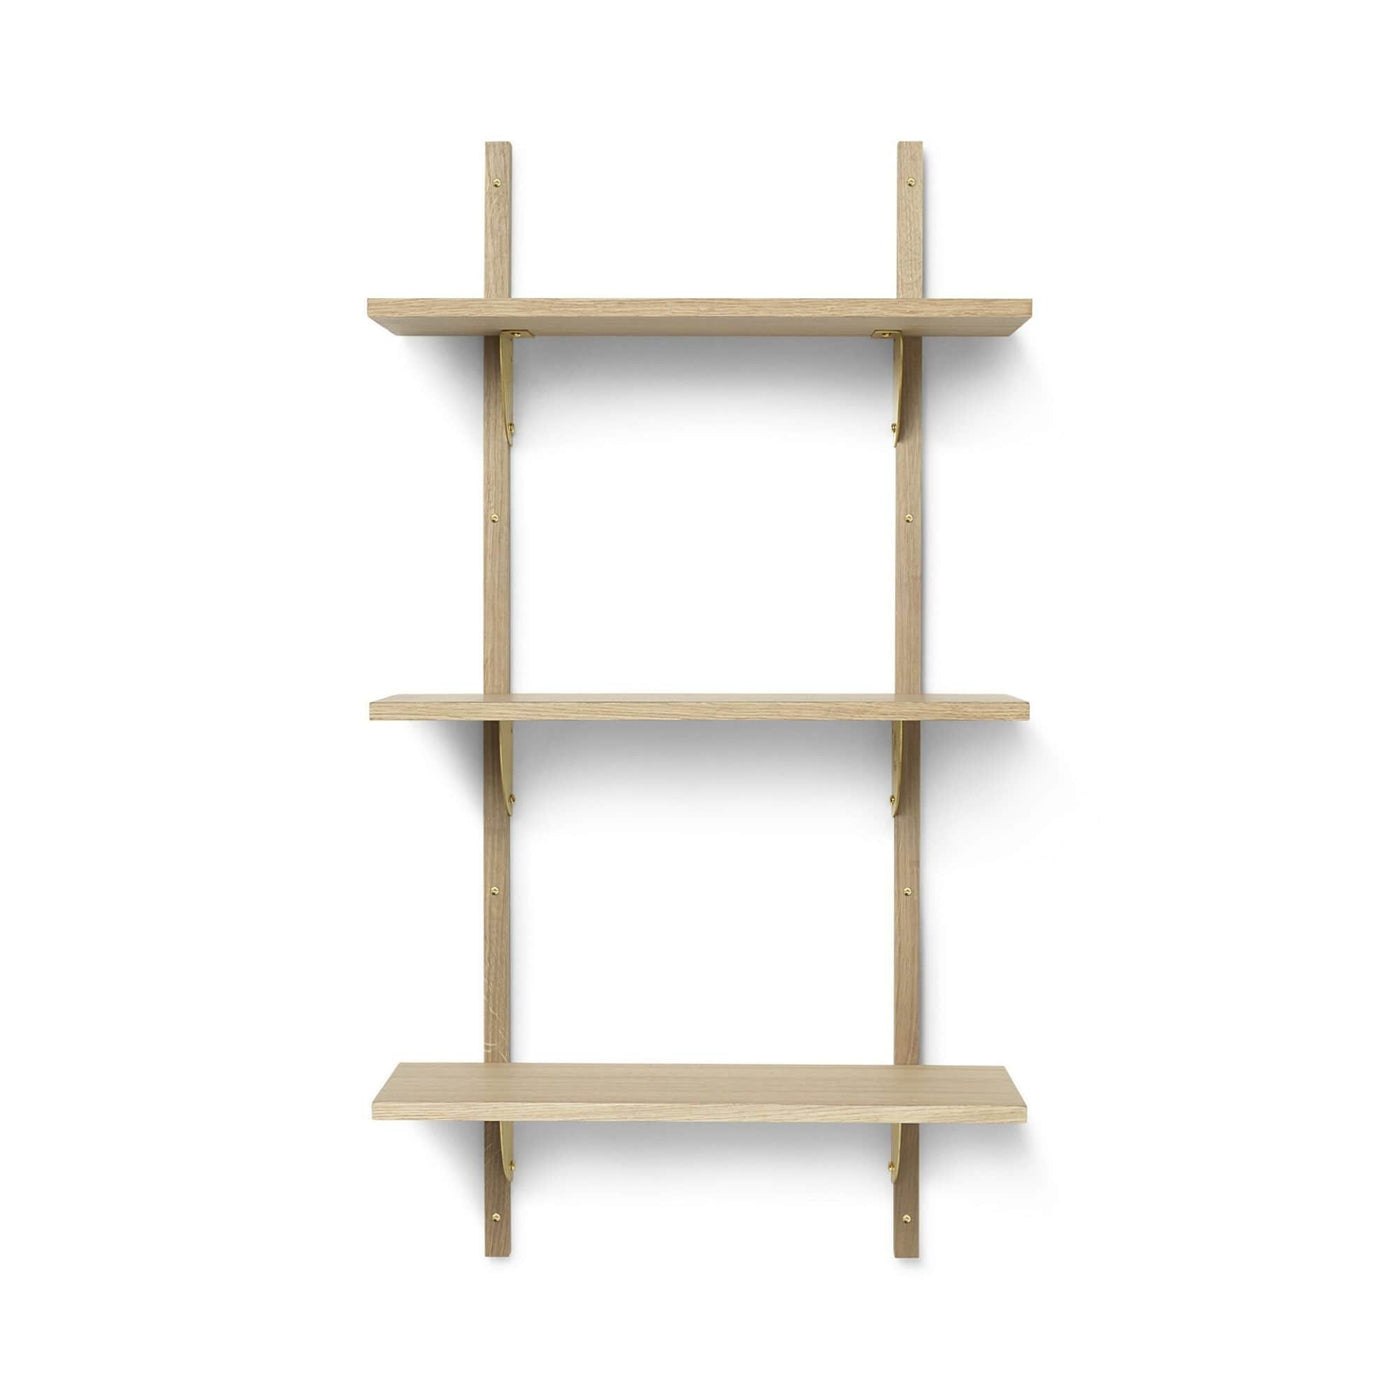 Ferm Living Sector shelf triple narrow in natural oak with polished brass brackets. Available from someday designs. #colour_natural-oak